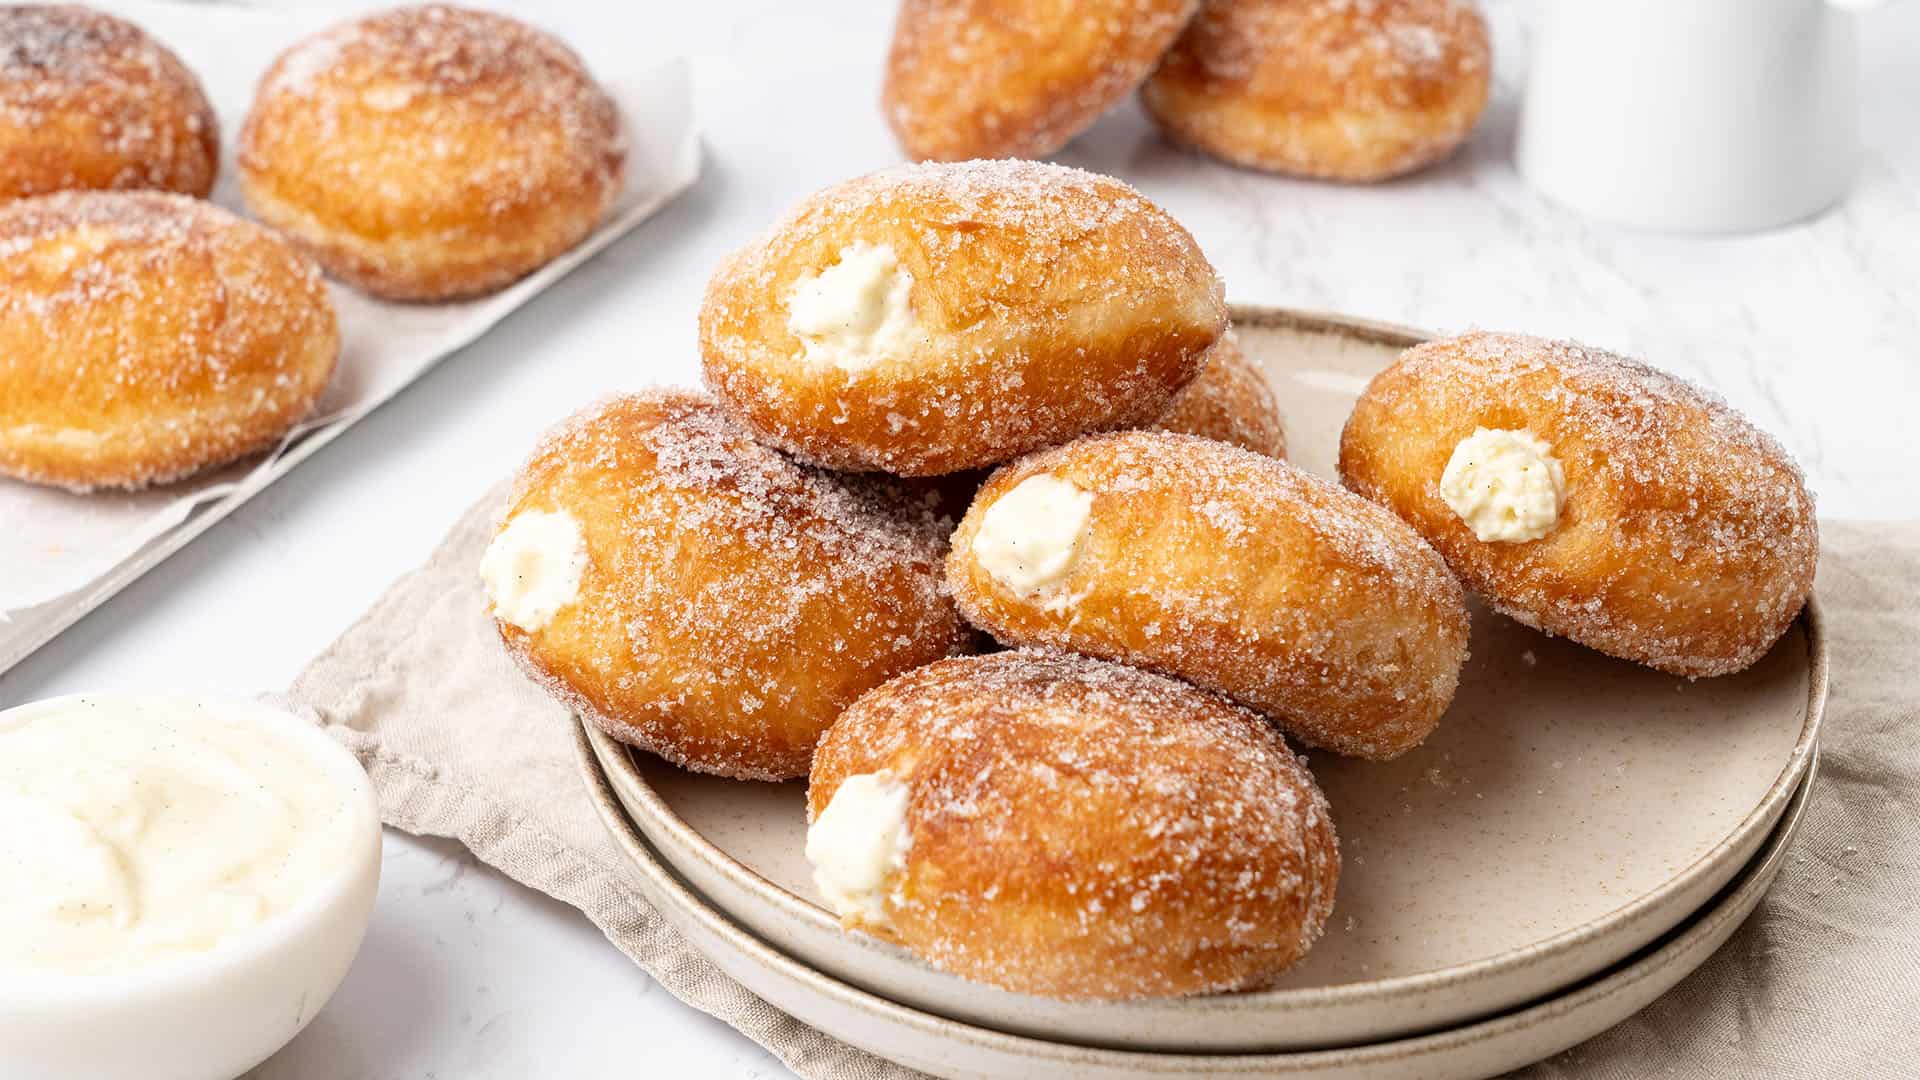 Bavarian cream donuts on a plate.